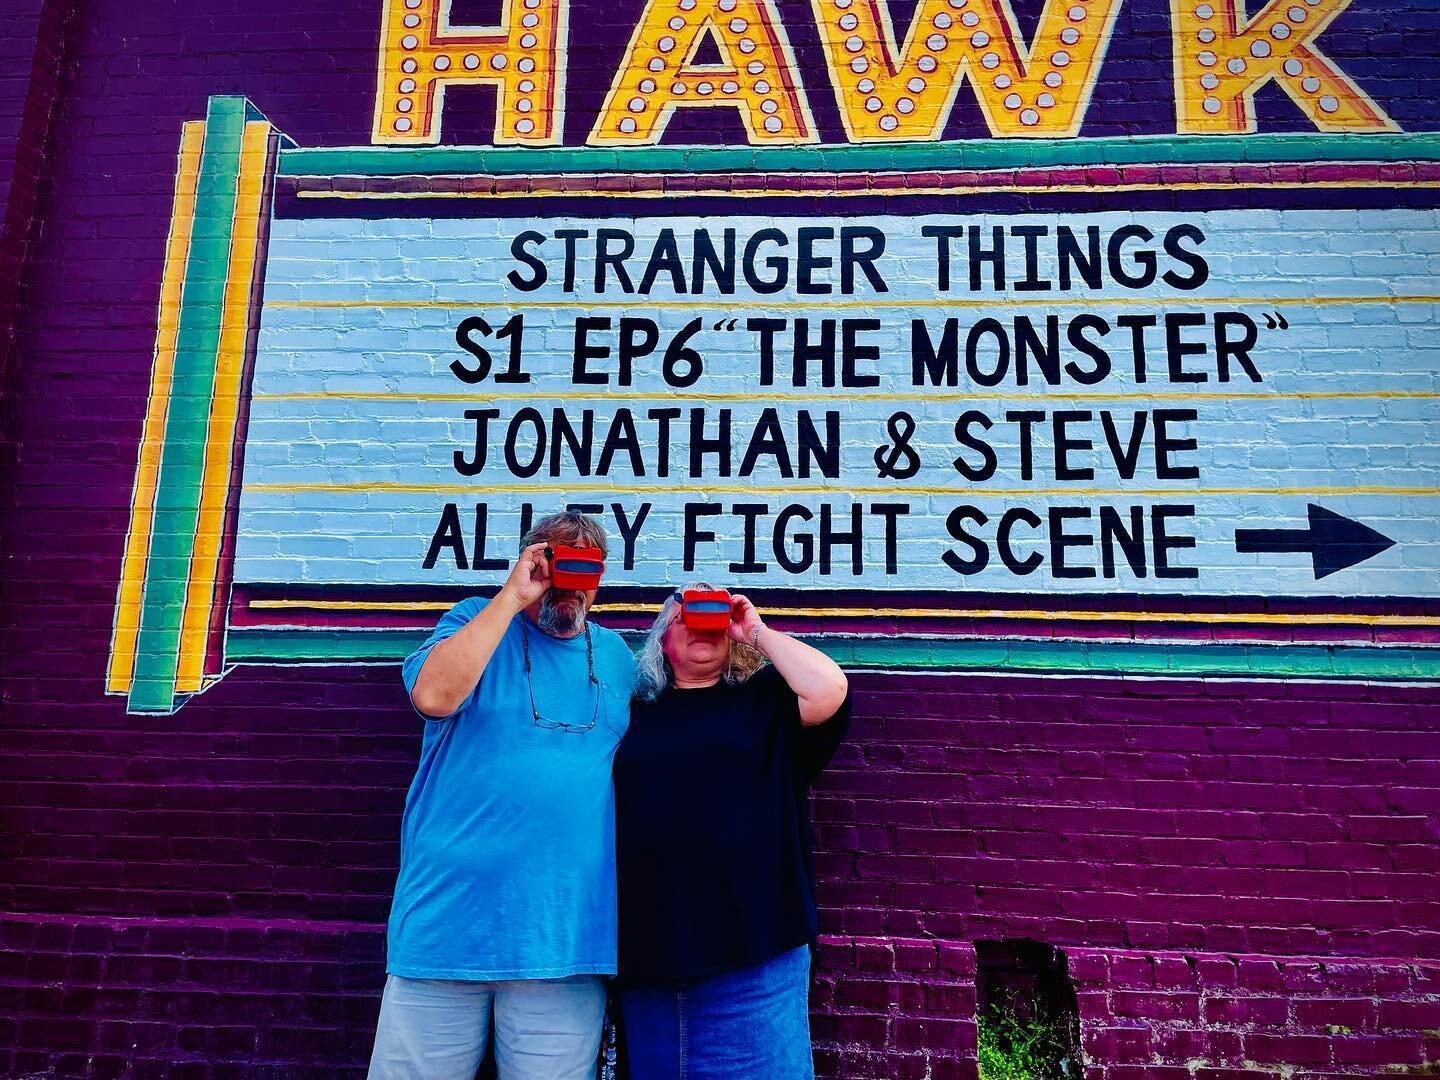 It was a perfect day in Hawkins! We had tour groups today from Pennsylvania to Augusta and we had a blast ALL DAY LONG. Stranger Things Fans are the best fans! TIX: www.strangertours.com 
#StrangerThings #StrangerThingsTour #DowntownHawkins #Stranger